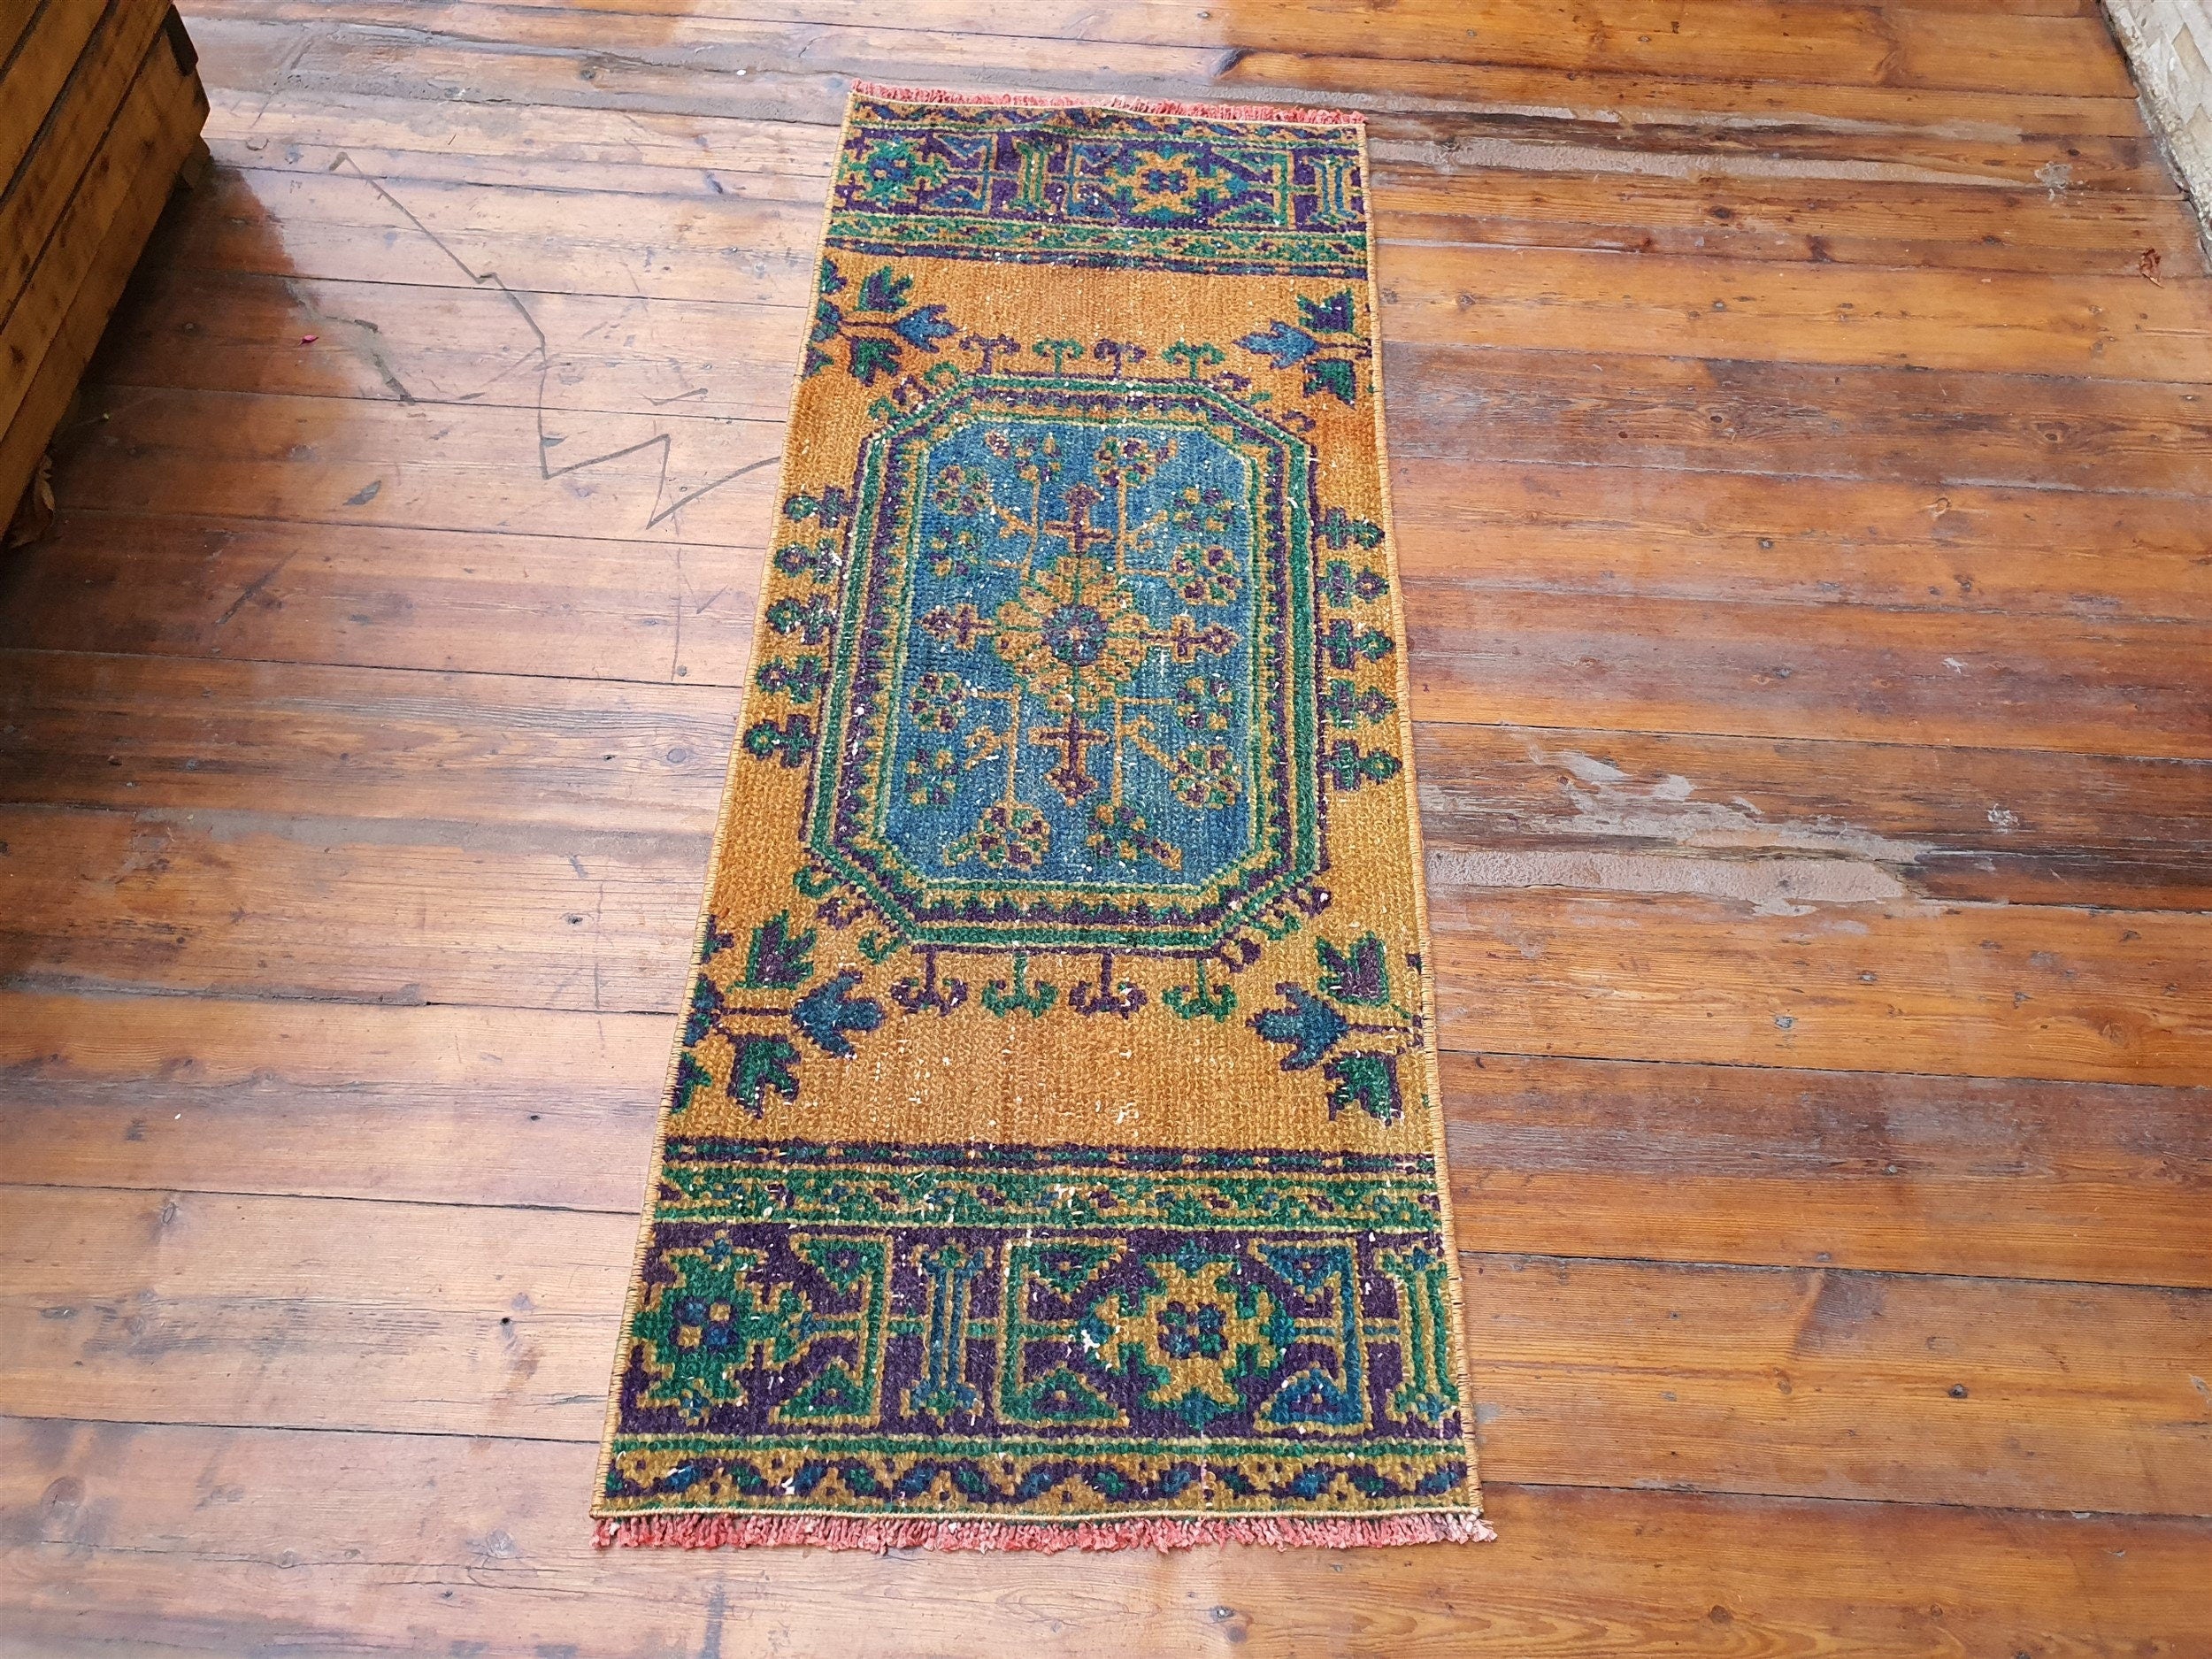 Small Turkish Rug, 4 ft 4 in x 1 ft 7 in, Apricot Orange and Teal Green / Grey Vintage Faded Distressed Door Mat